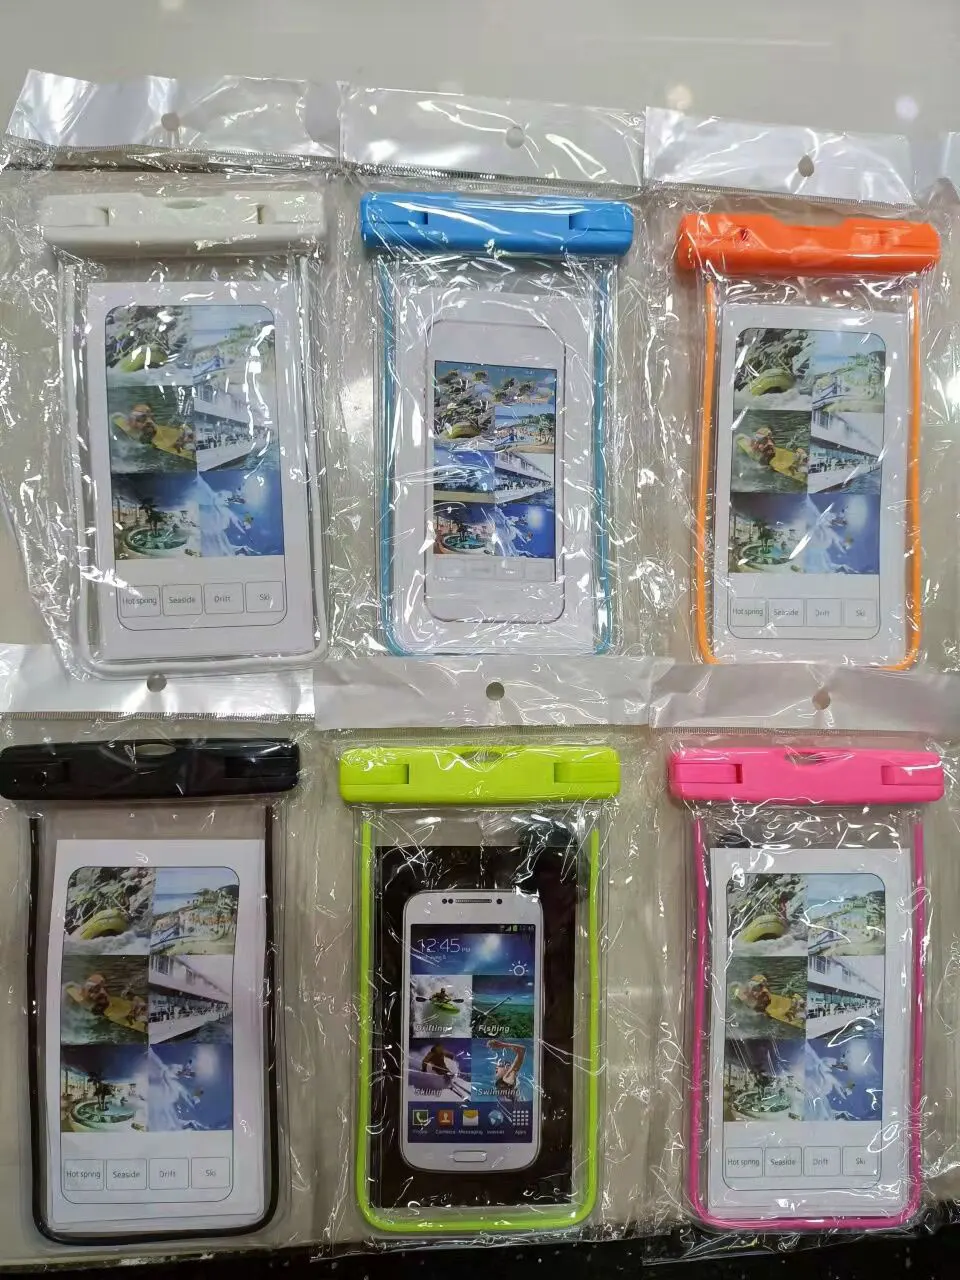 Free Sample Wholesale Pvc Universal Size Underwater Ipx8 Water Proof Pouch Case Waterproof Phone Bag For Mobile Phone